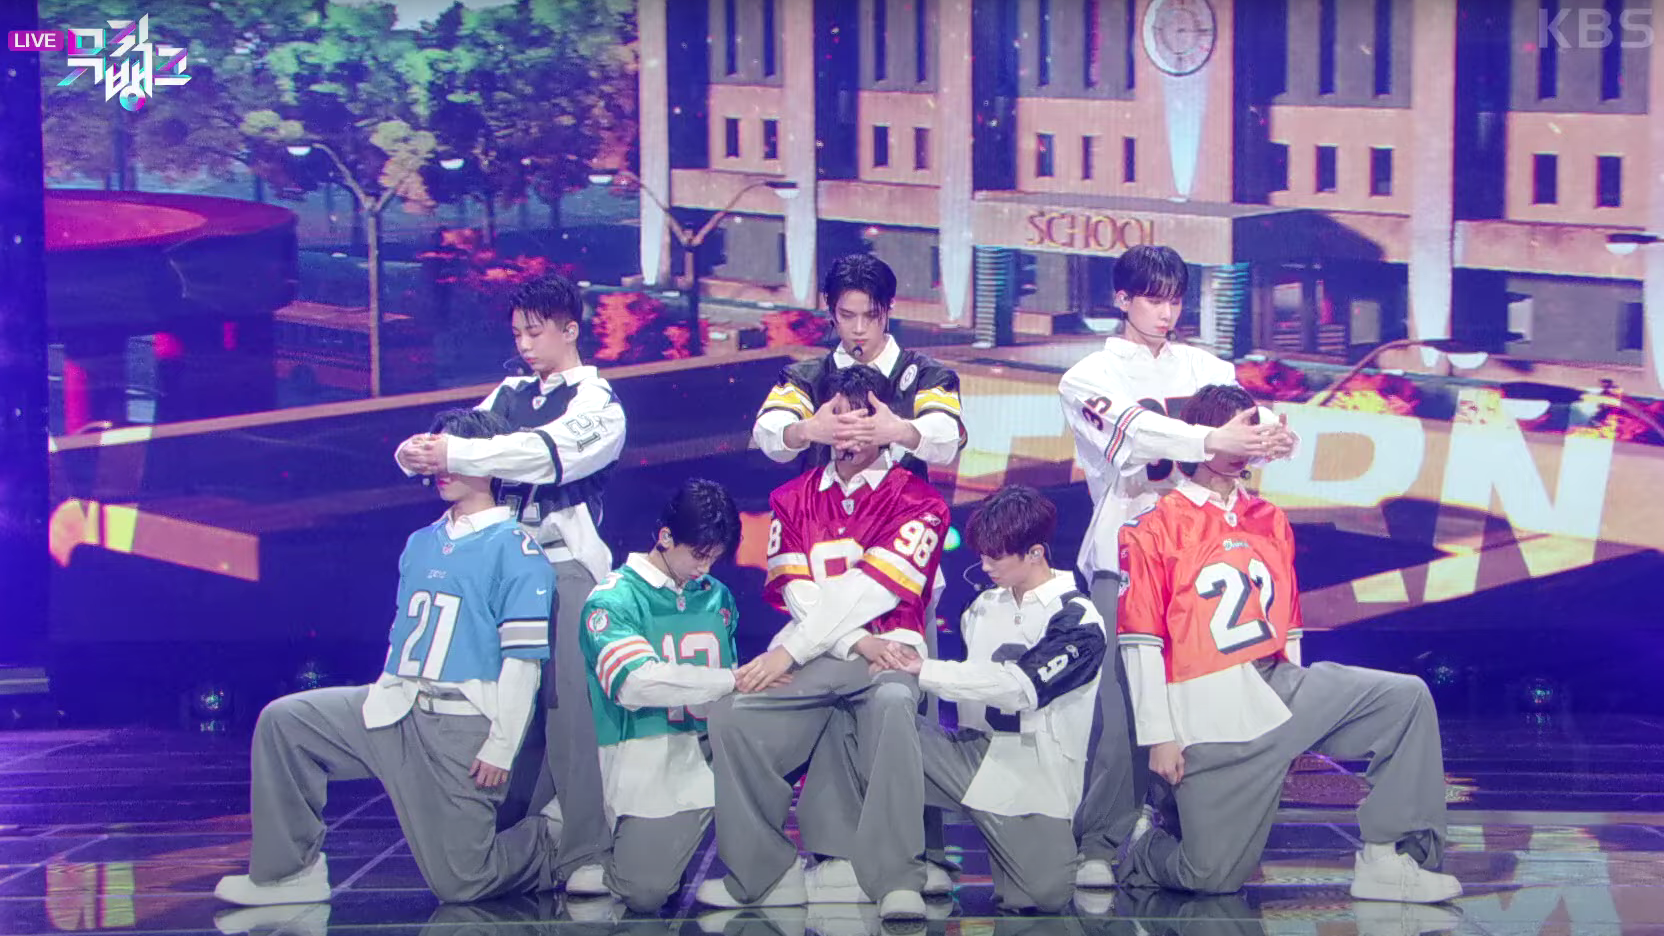 A photo of the K-Pop group 8TURN as they are about to perform on the TV show Music Bank. Each is wearing a vintage NFL jersey.